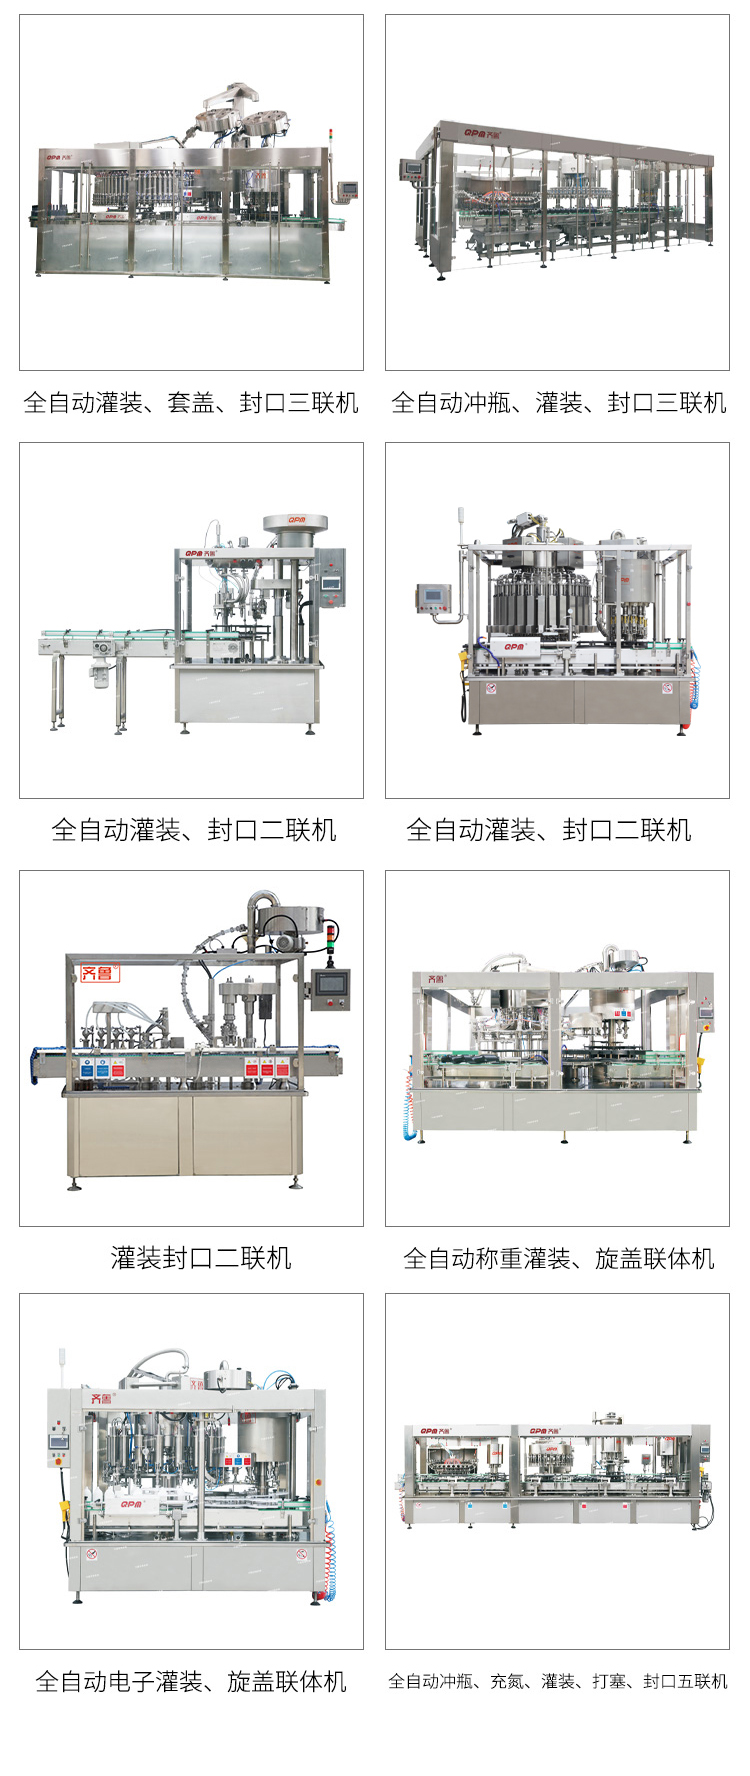 Qilu Wine Filling Machine Fully Automatic Liquor Production Line Red Wine Filling Production Line Customizable and Easy to Maintain